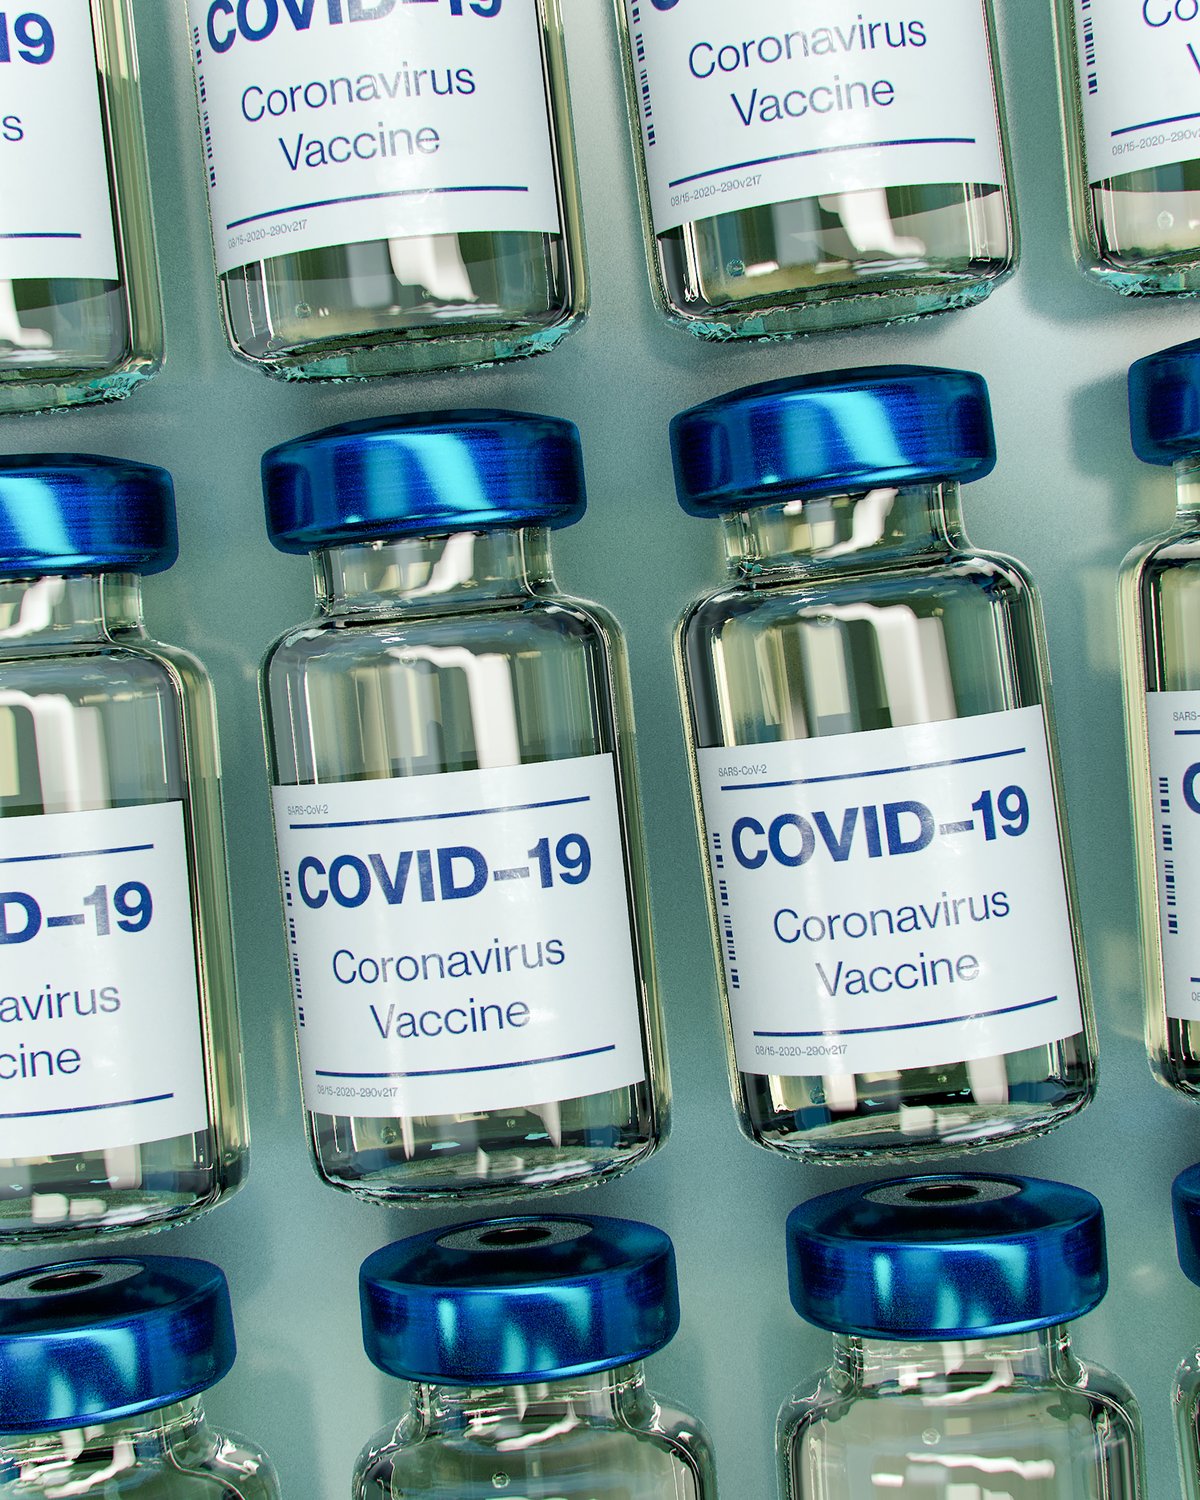 The Wright Center is offering vaccines against the BA.4 and BA.5 variants of COVID-19.